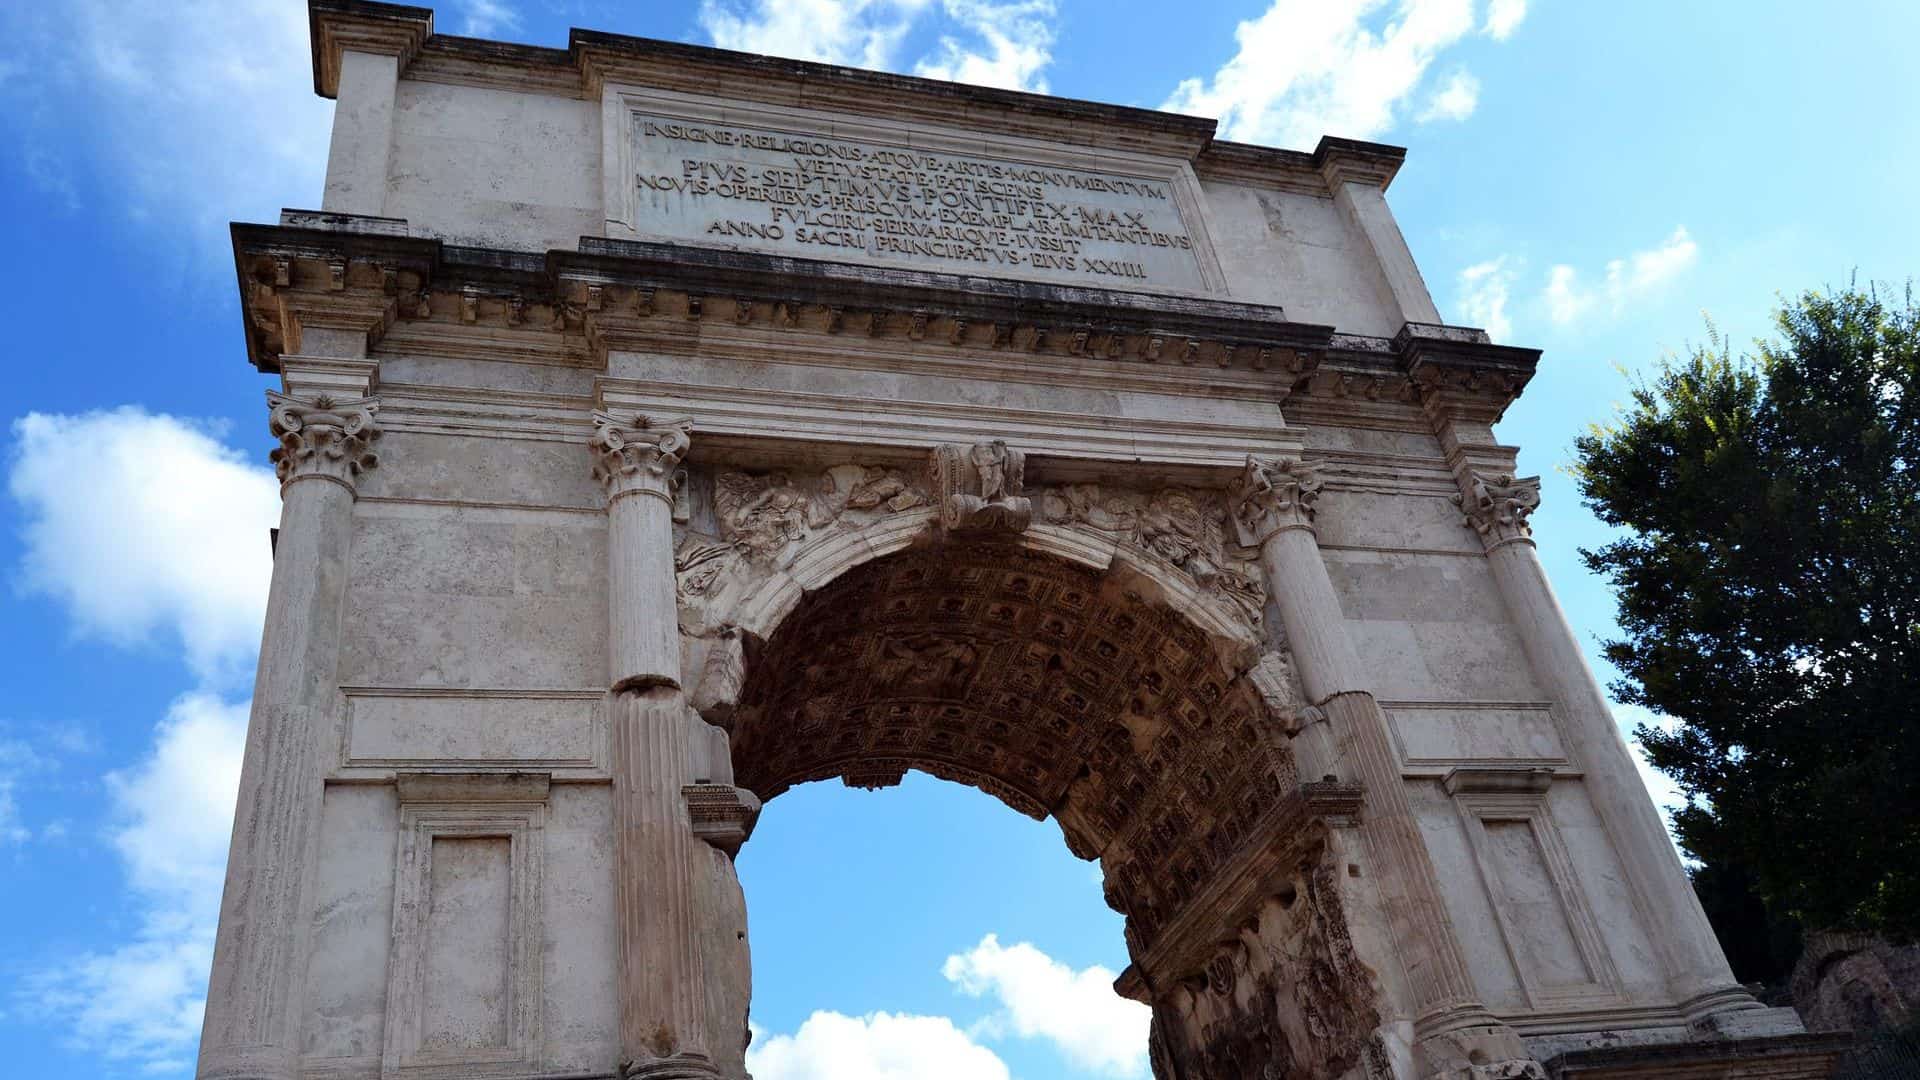 Upward shot of the Arch of Titus at the Roman Forum